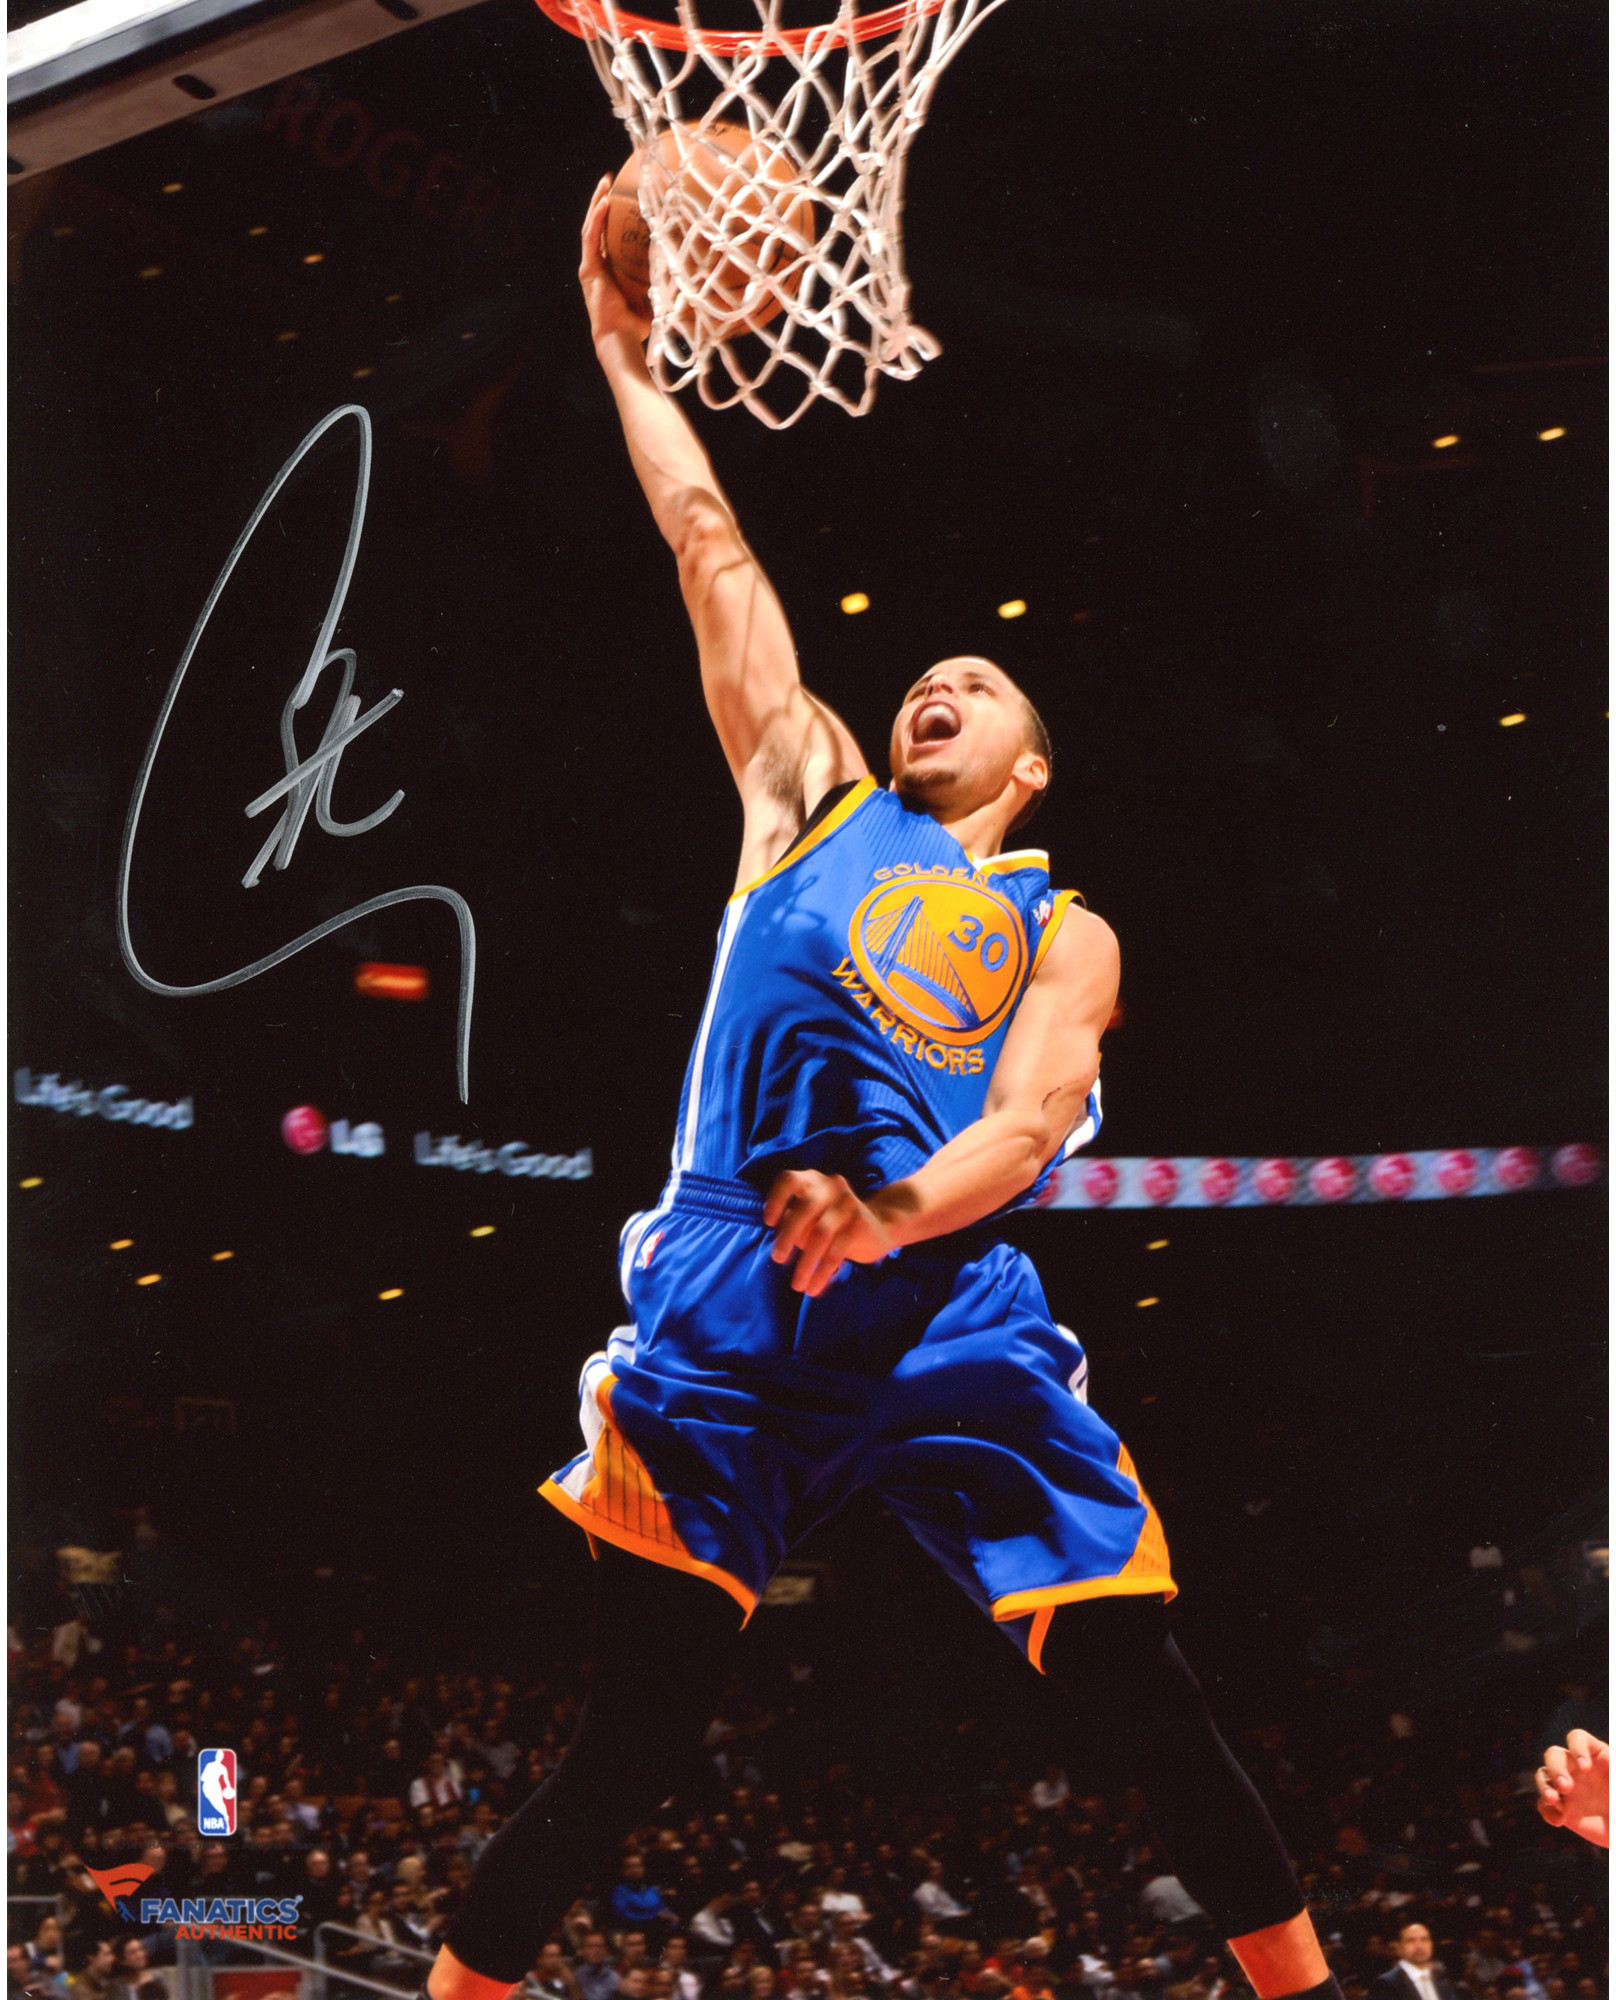 cool stephen curry wallpapers,basketball moves,basketball player,basketball hoop,slam dunk,basketball autographed paraphernalia